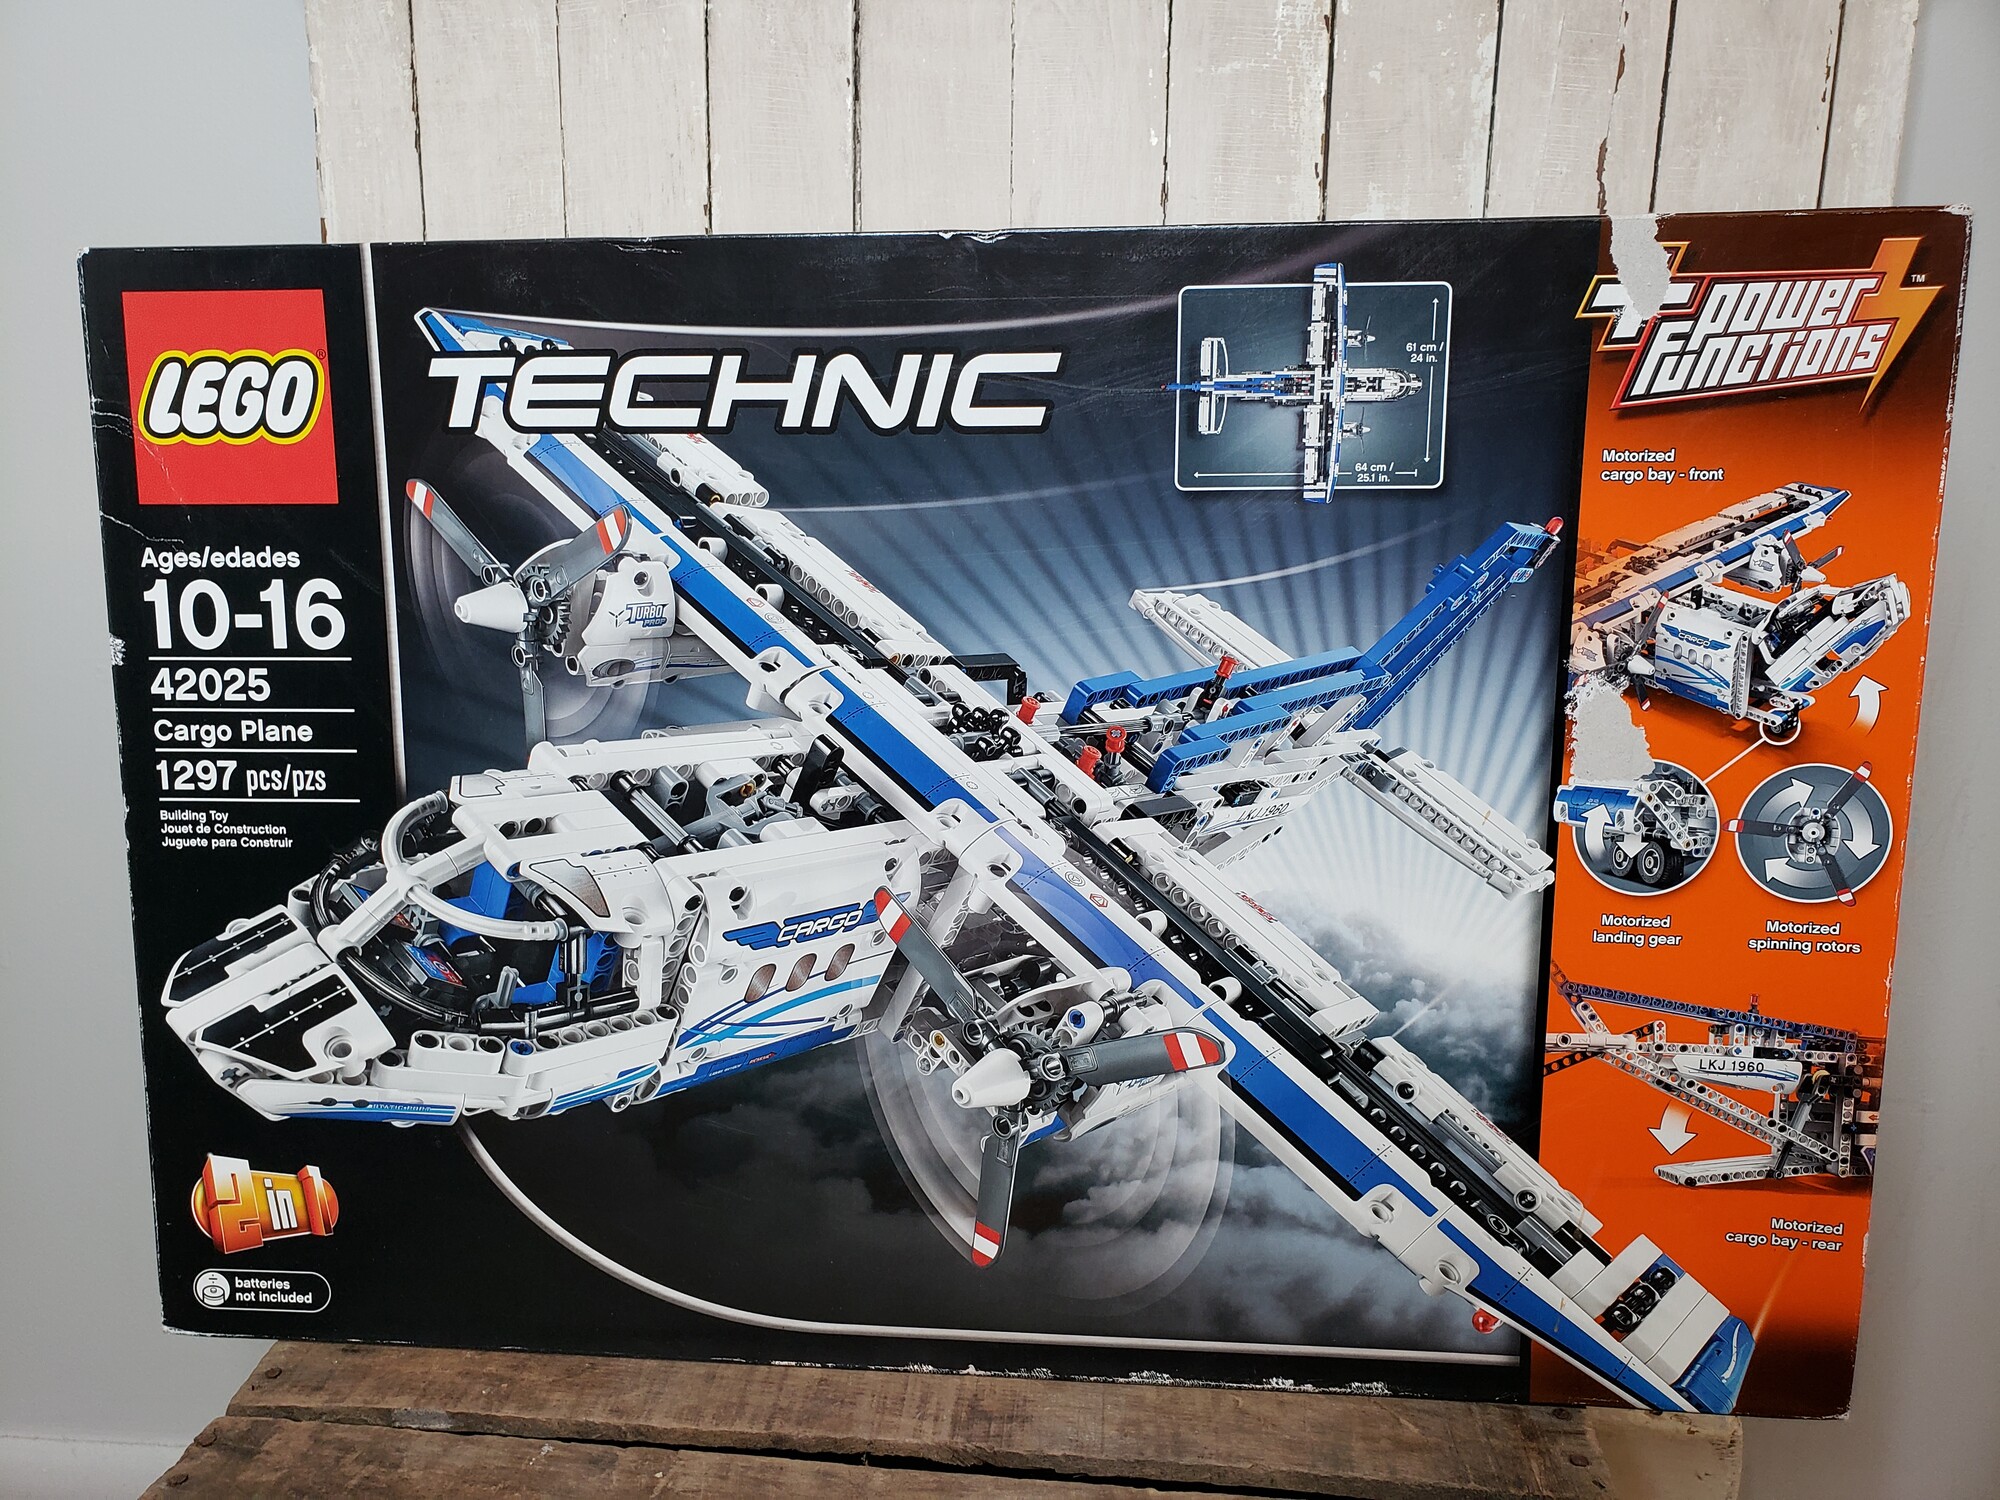 LEGO Technic Cargo Plane 42025. Used and in good conditon. Built by an adult for display collection.